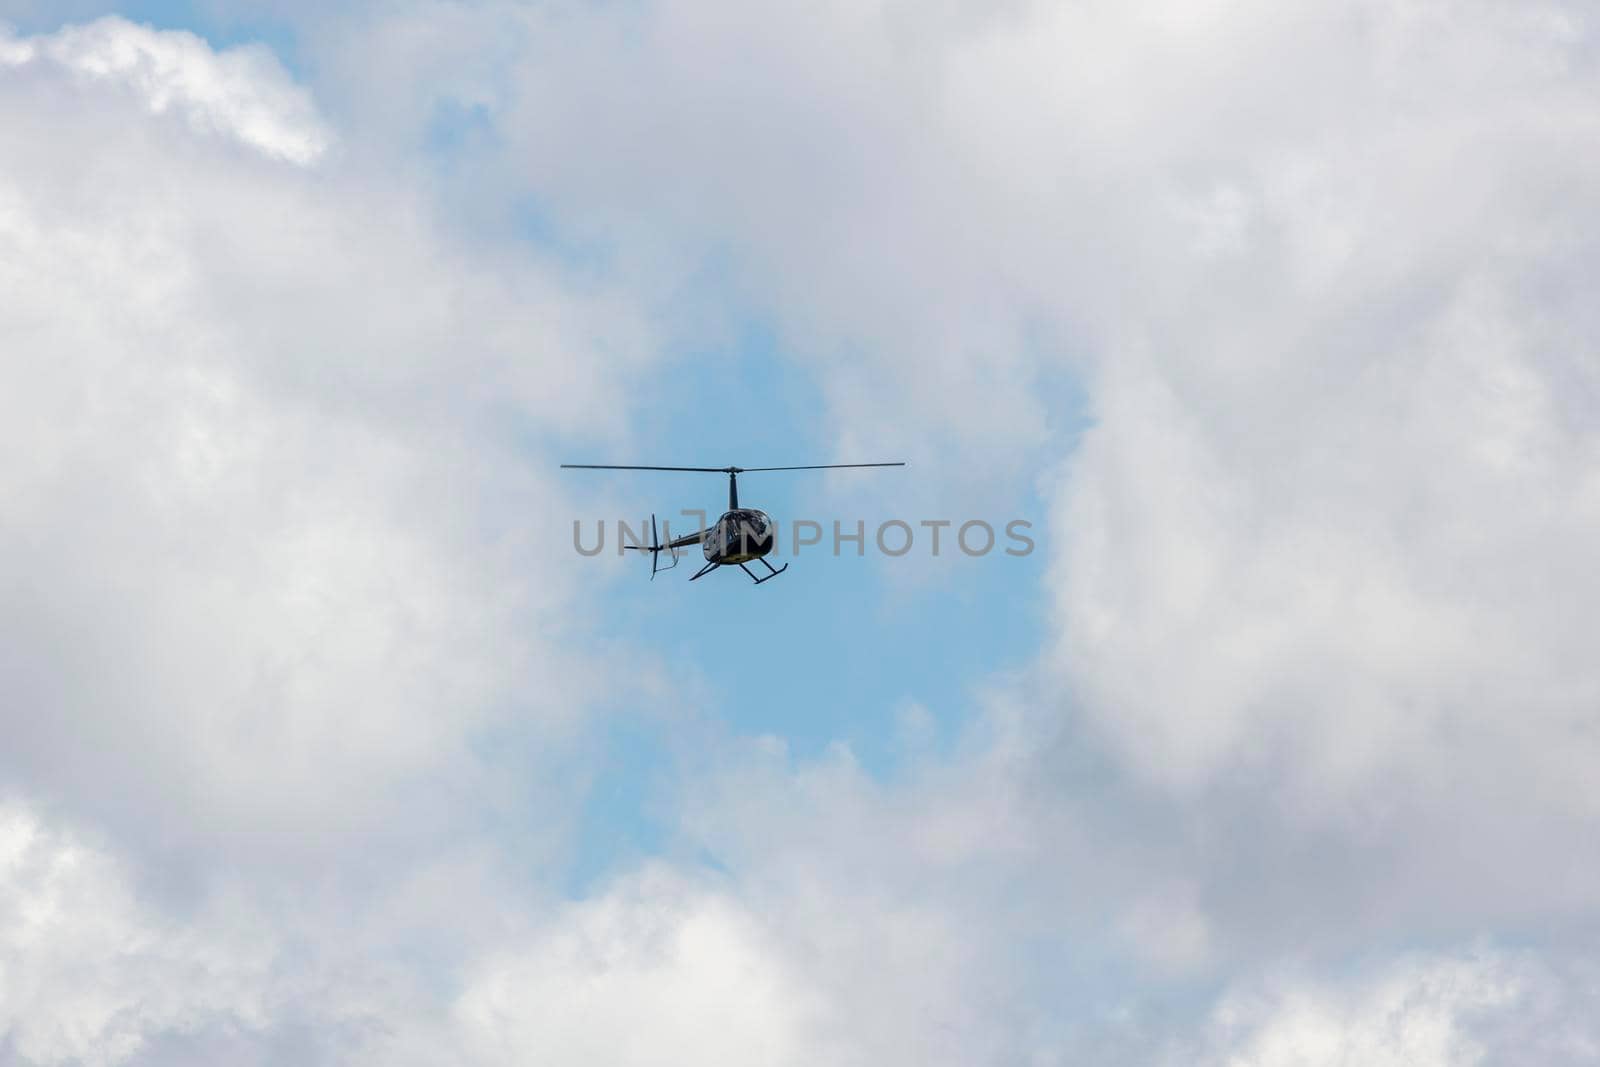 A helicopter flying with sightseeing tourists in a cloudy sky in regional Australia